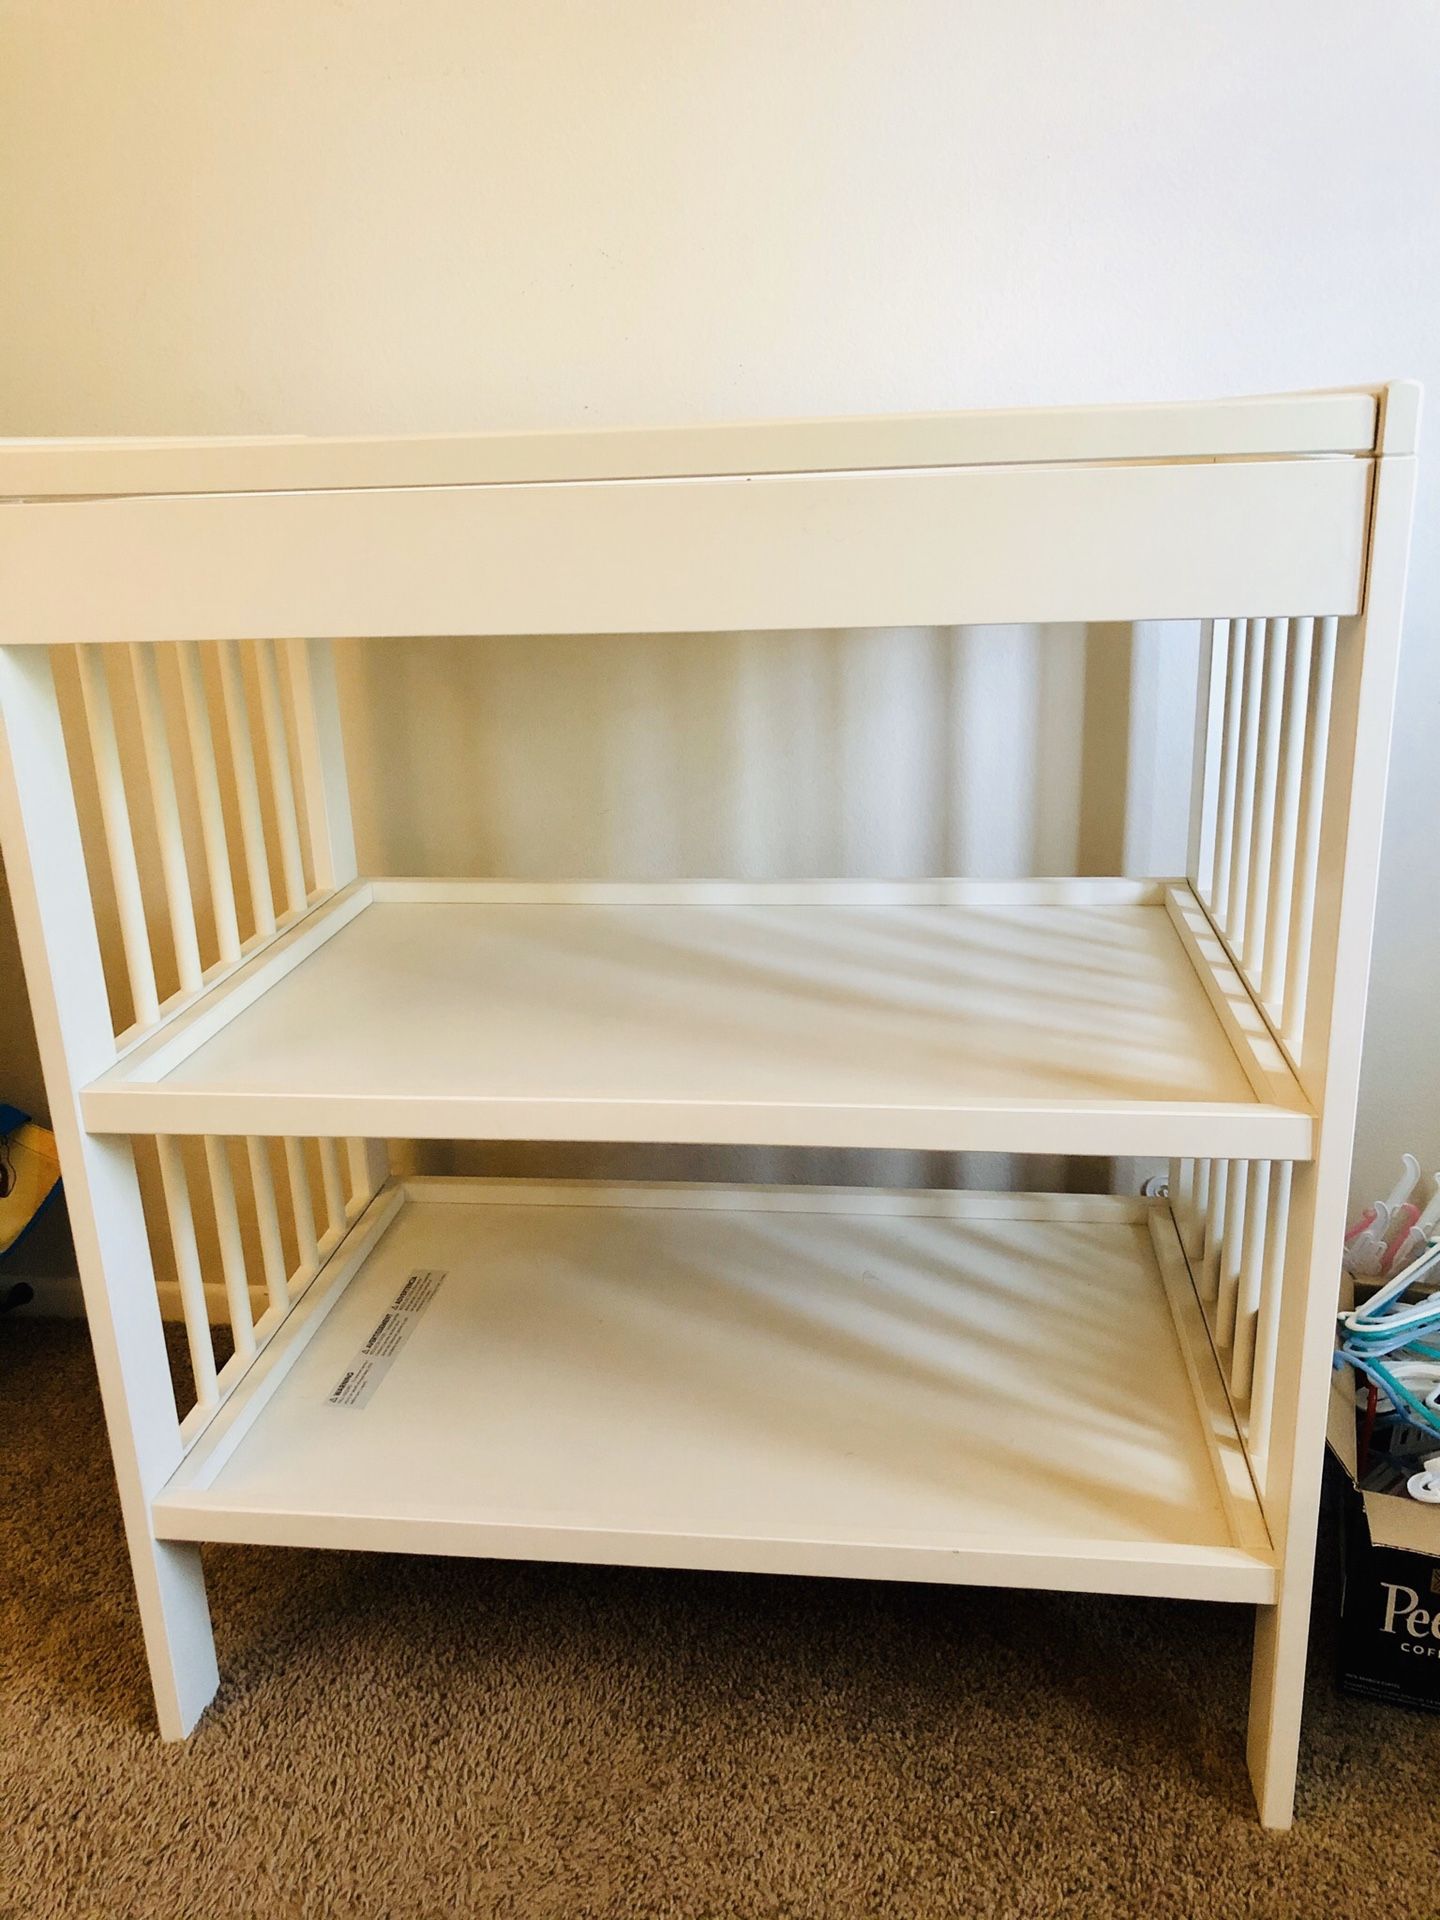 Baby Channing table excellent condition! Baby changing table